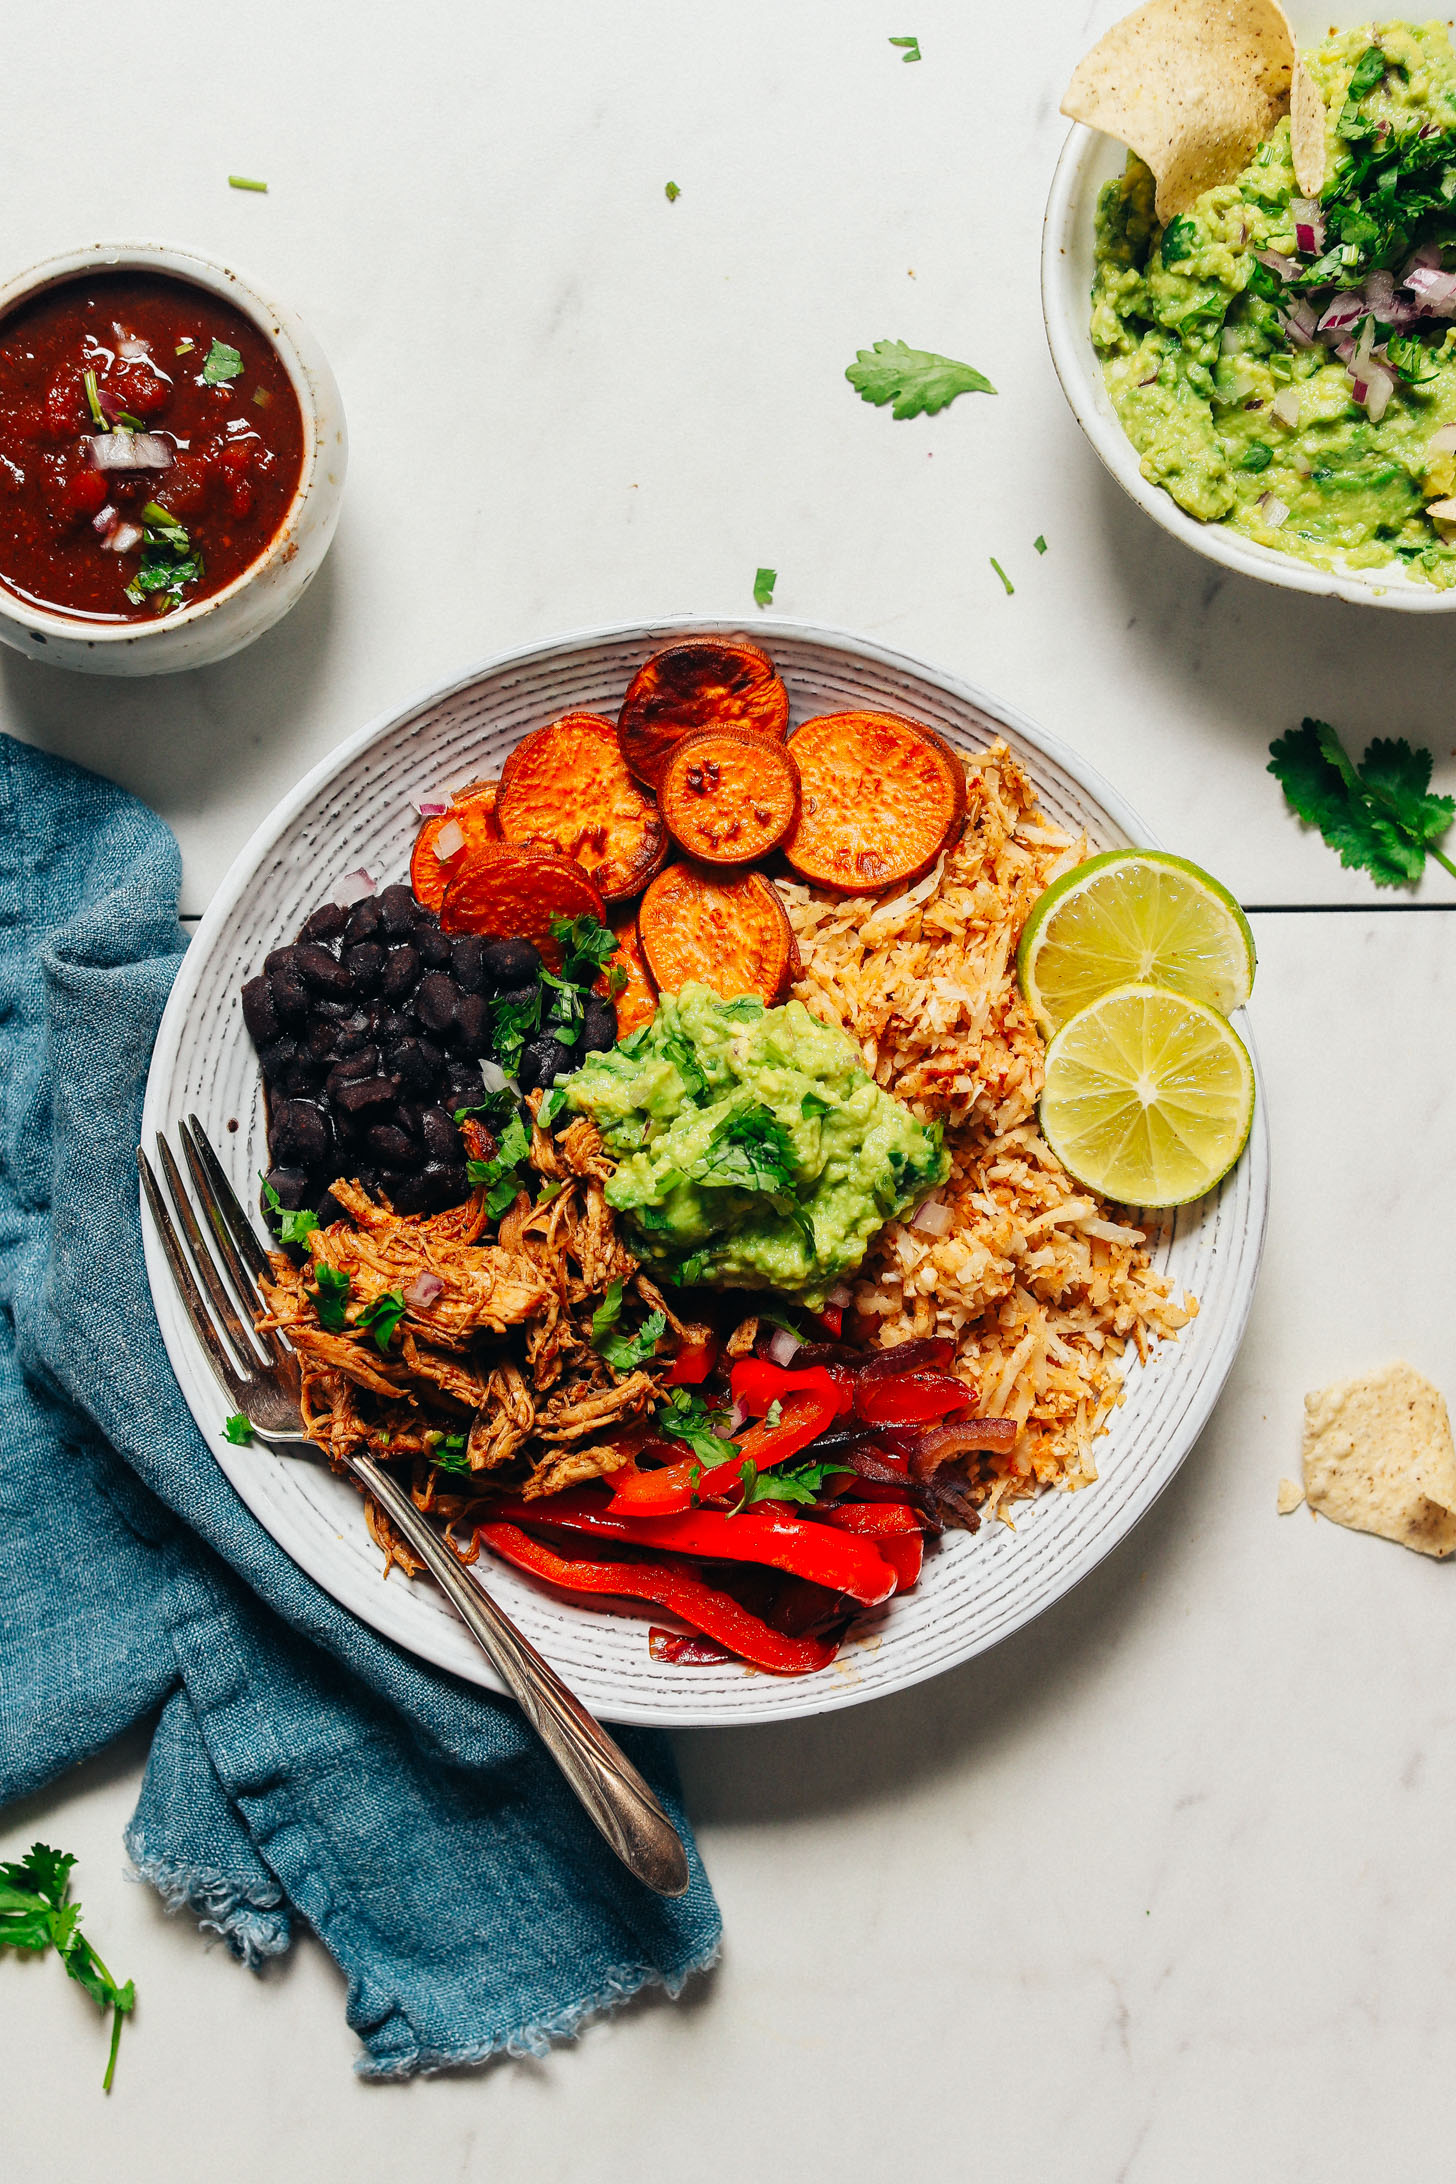 Grain-Free Burrito Bowl made with cauliflower rice, peppers, black beans, and sweet potatoes